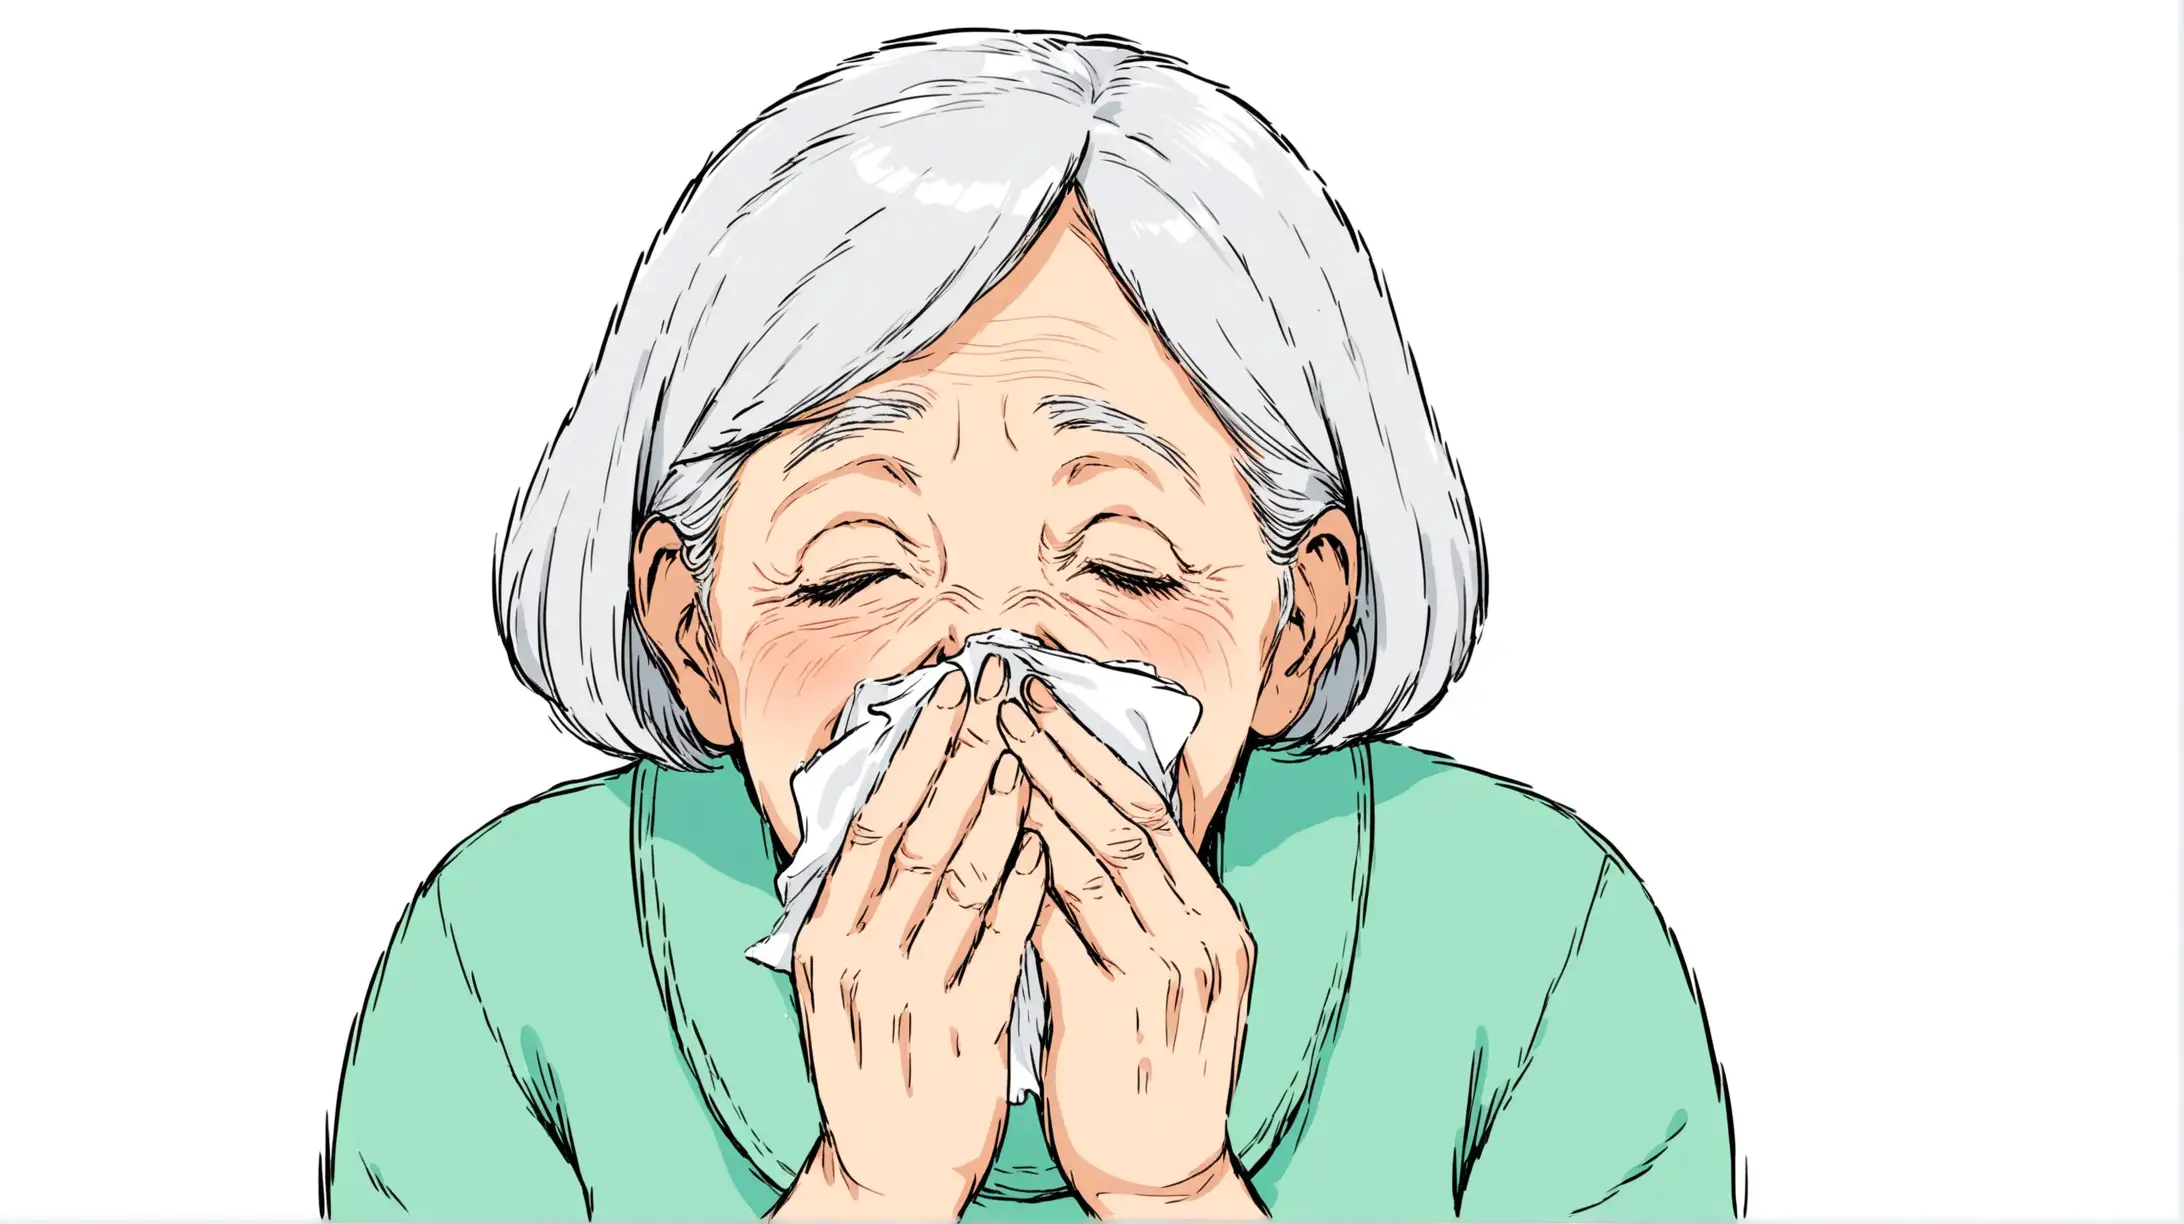 simple DRAWING illustration of a grandma sneezing covering his nose with tissue paper and the other side of the image is grandma happy breathing fresh air on a white background. 